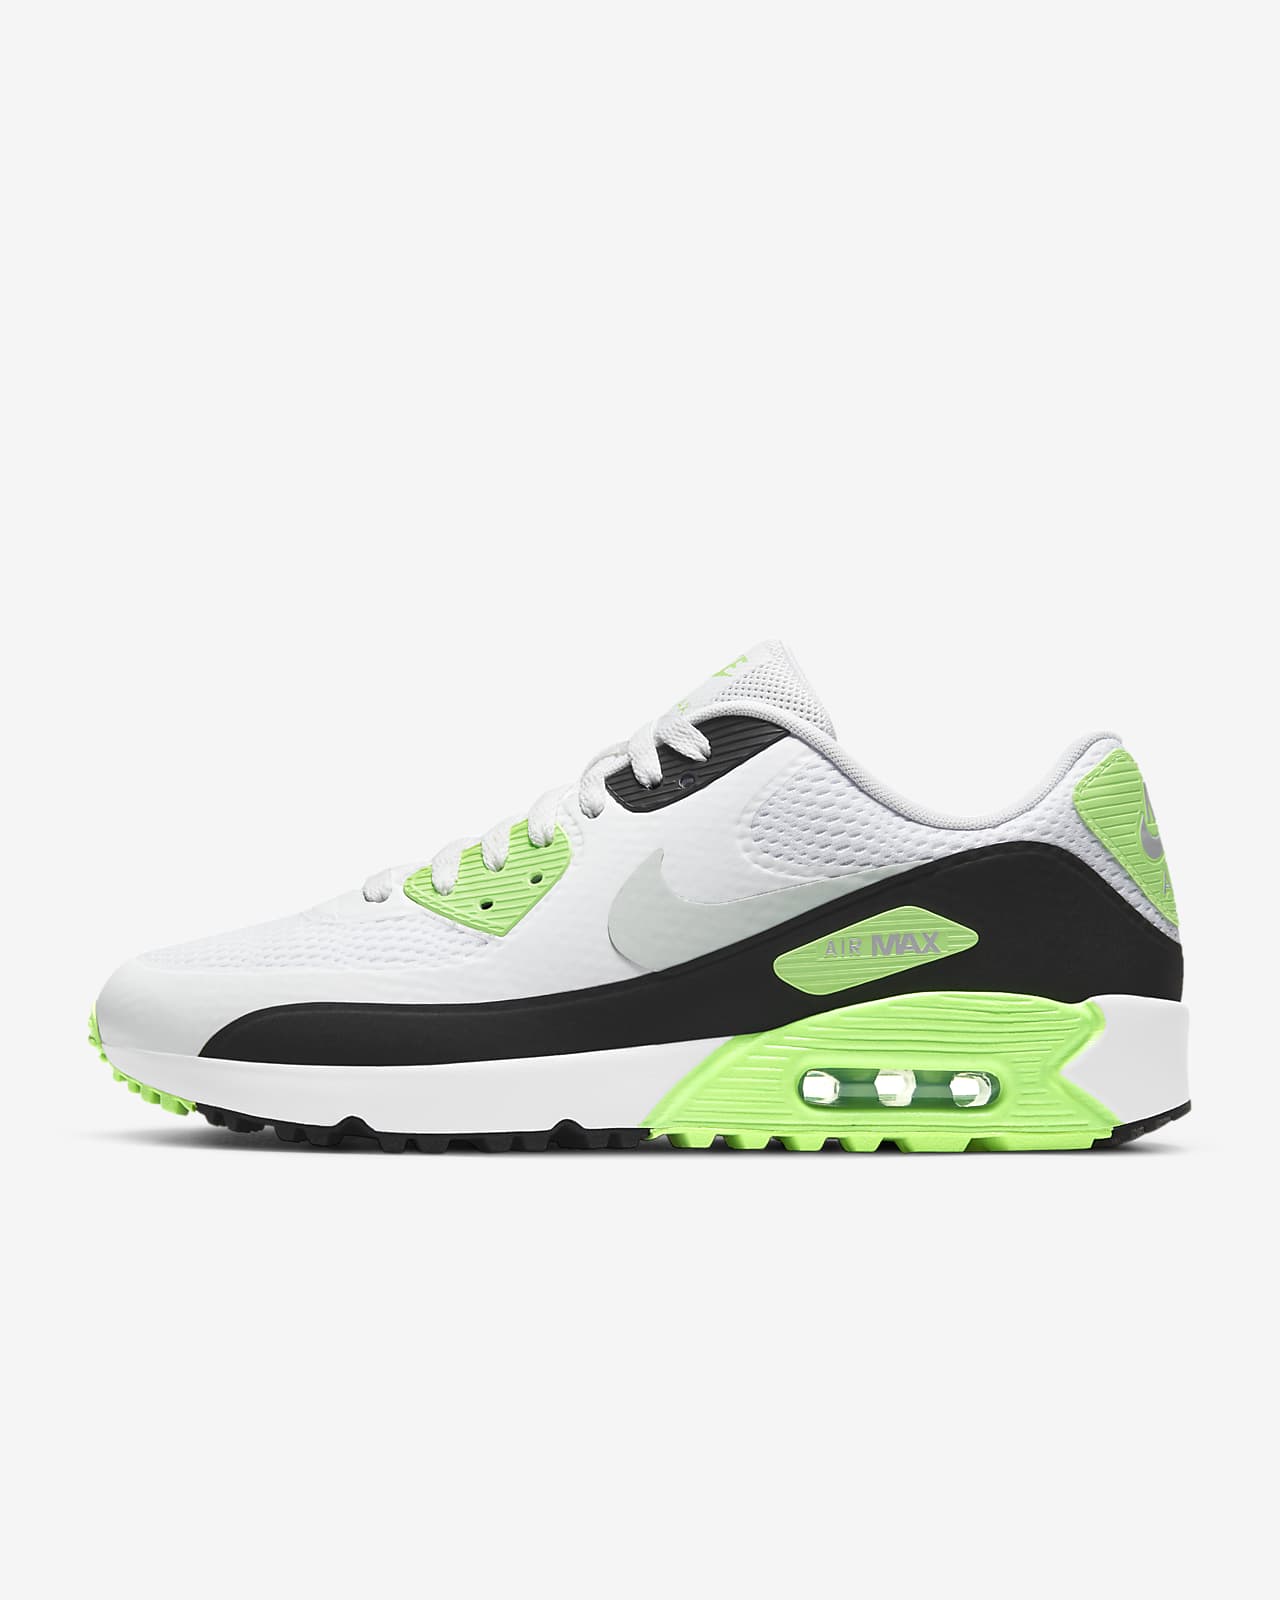 do air max 90s fit true to size